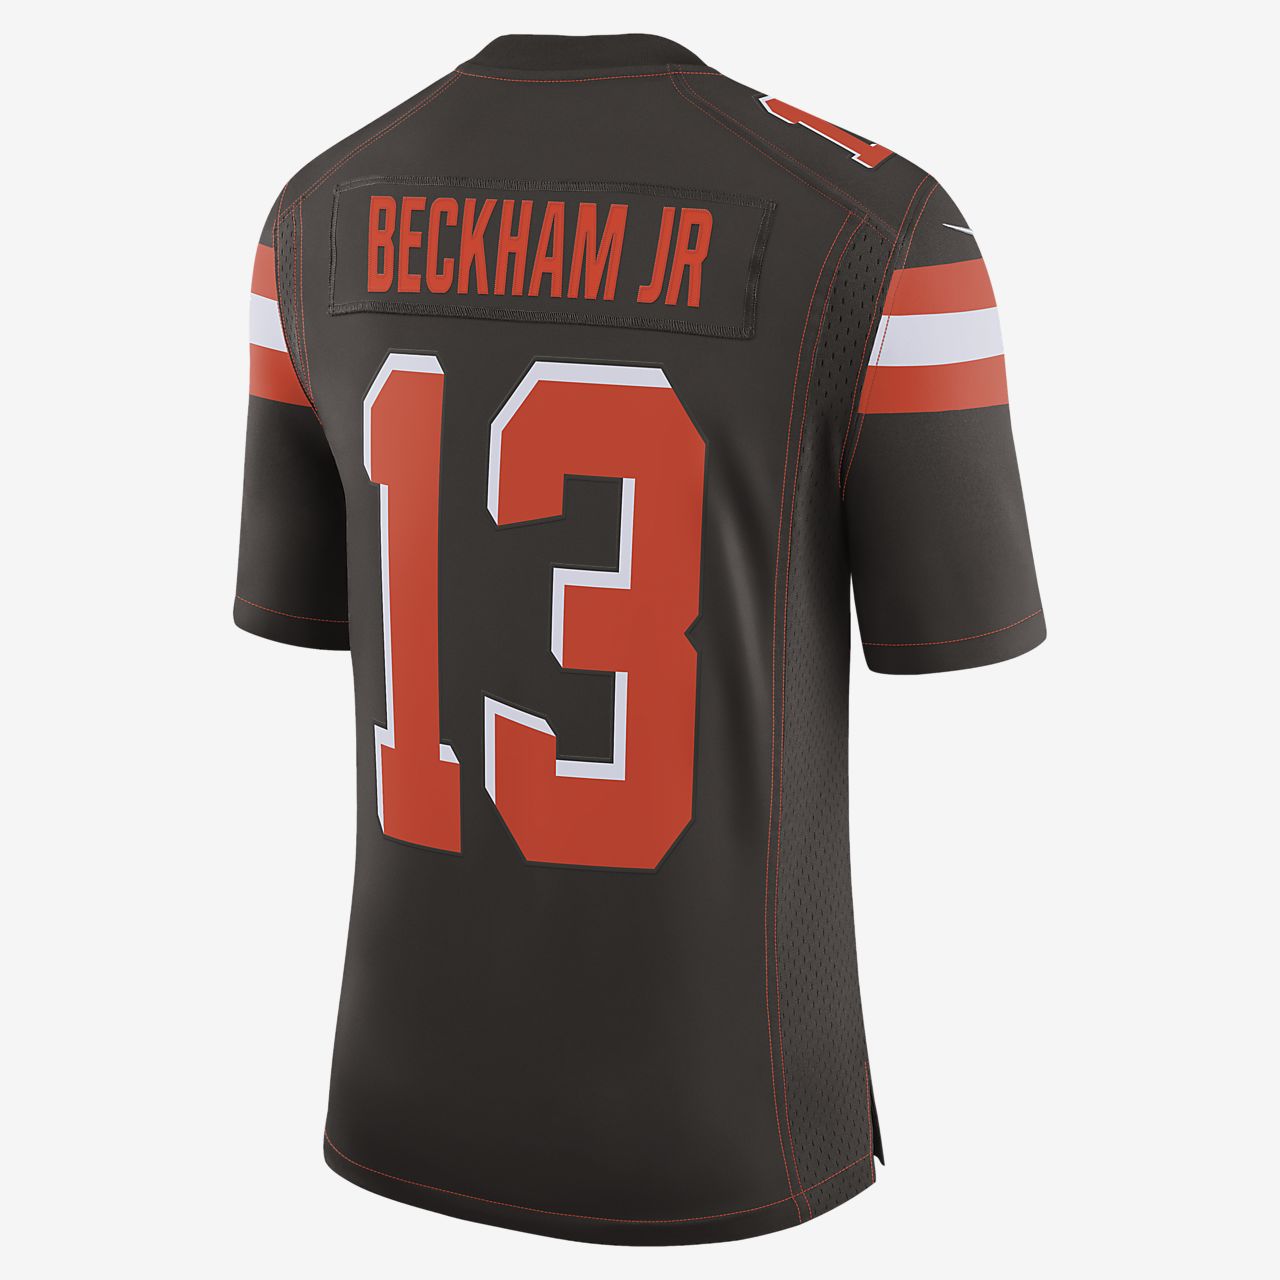 infant browns jersey